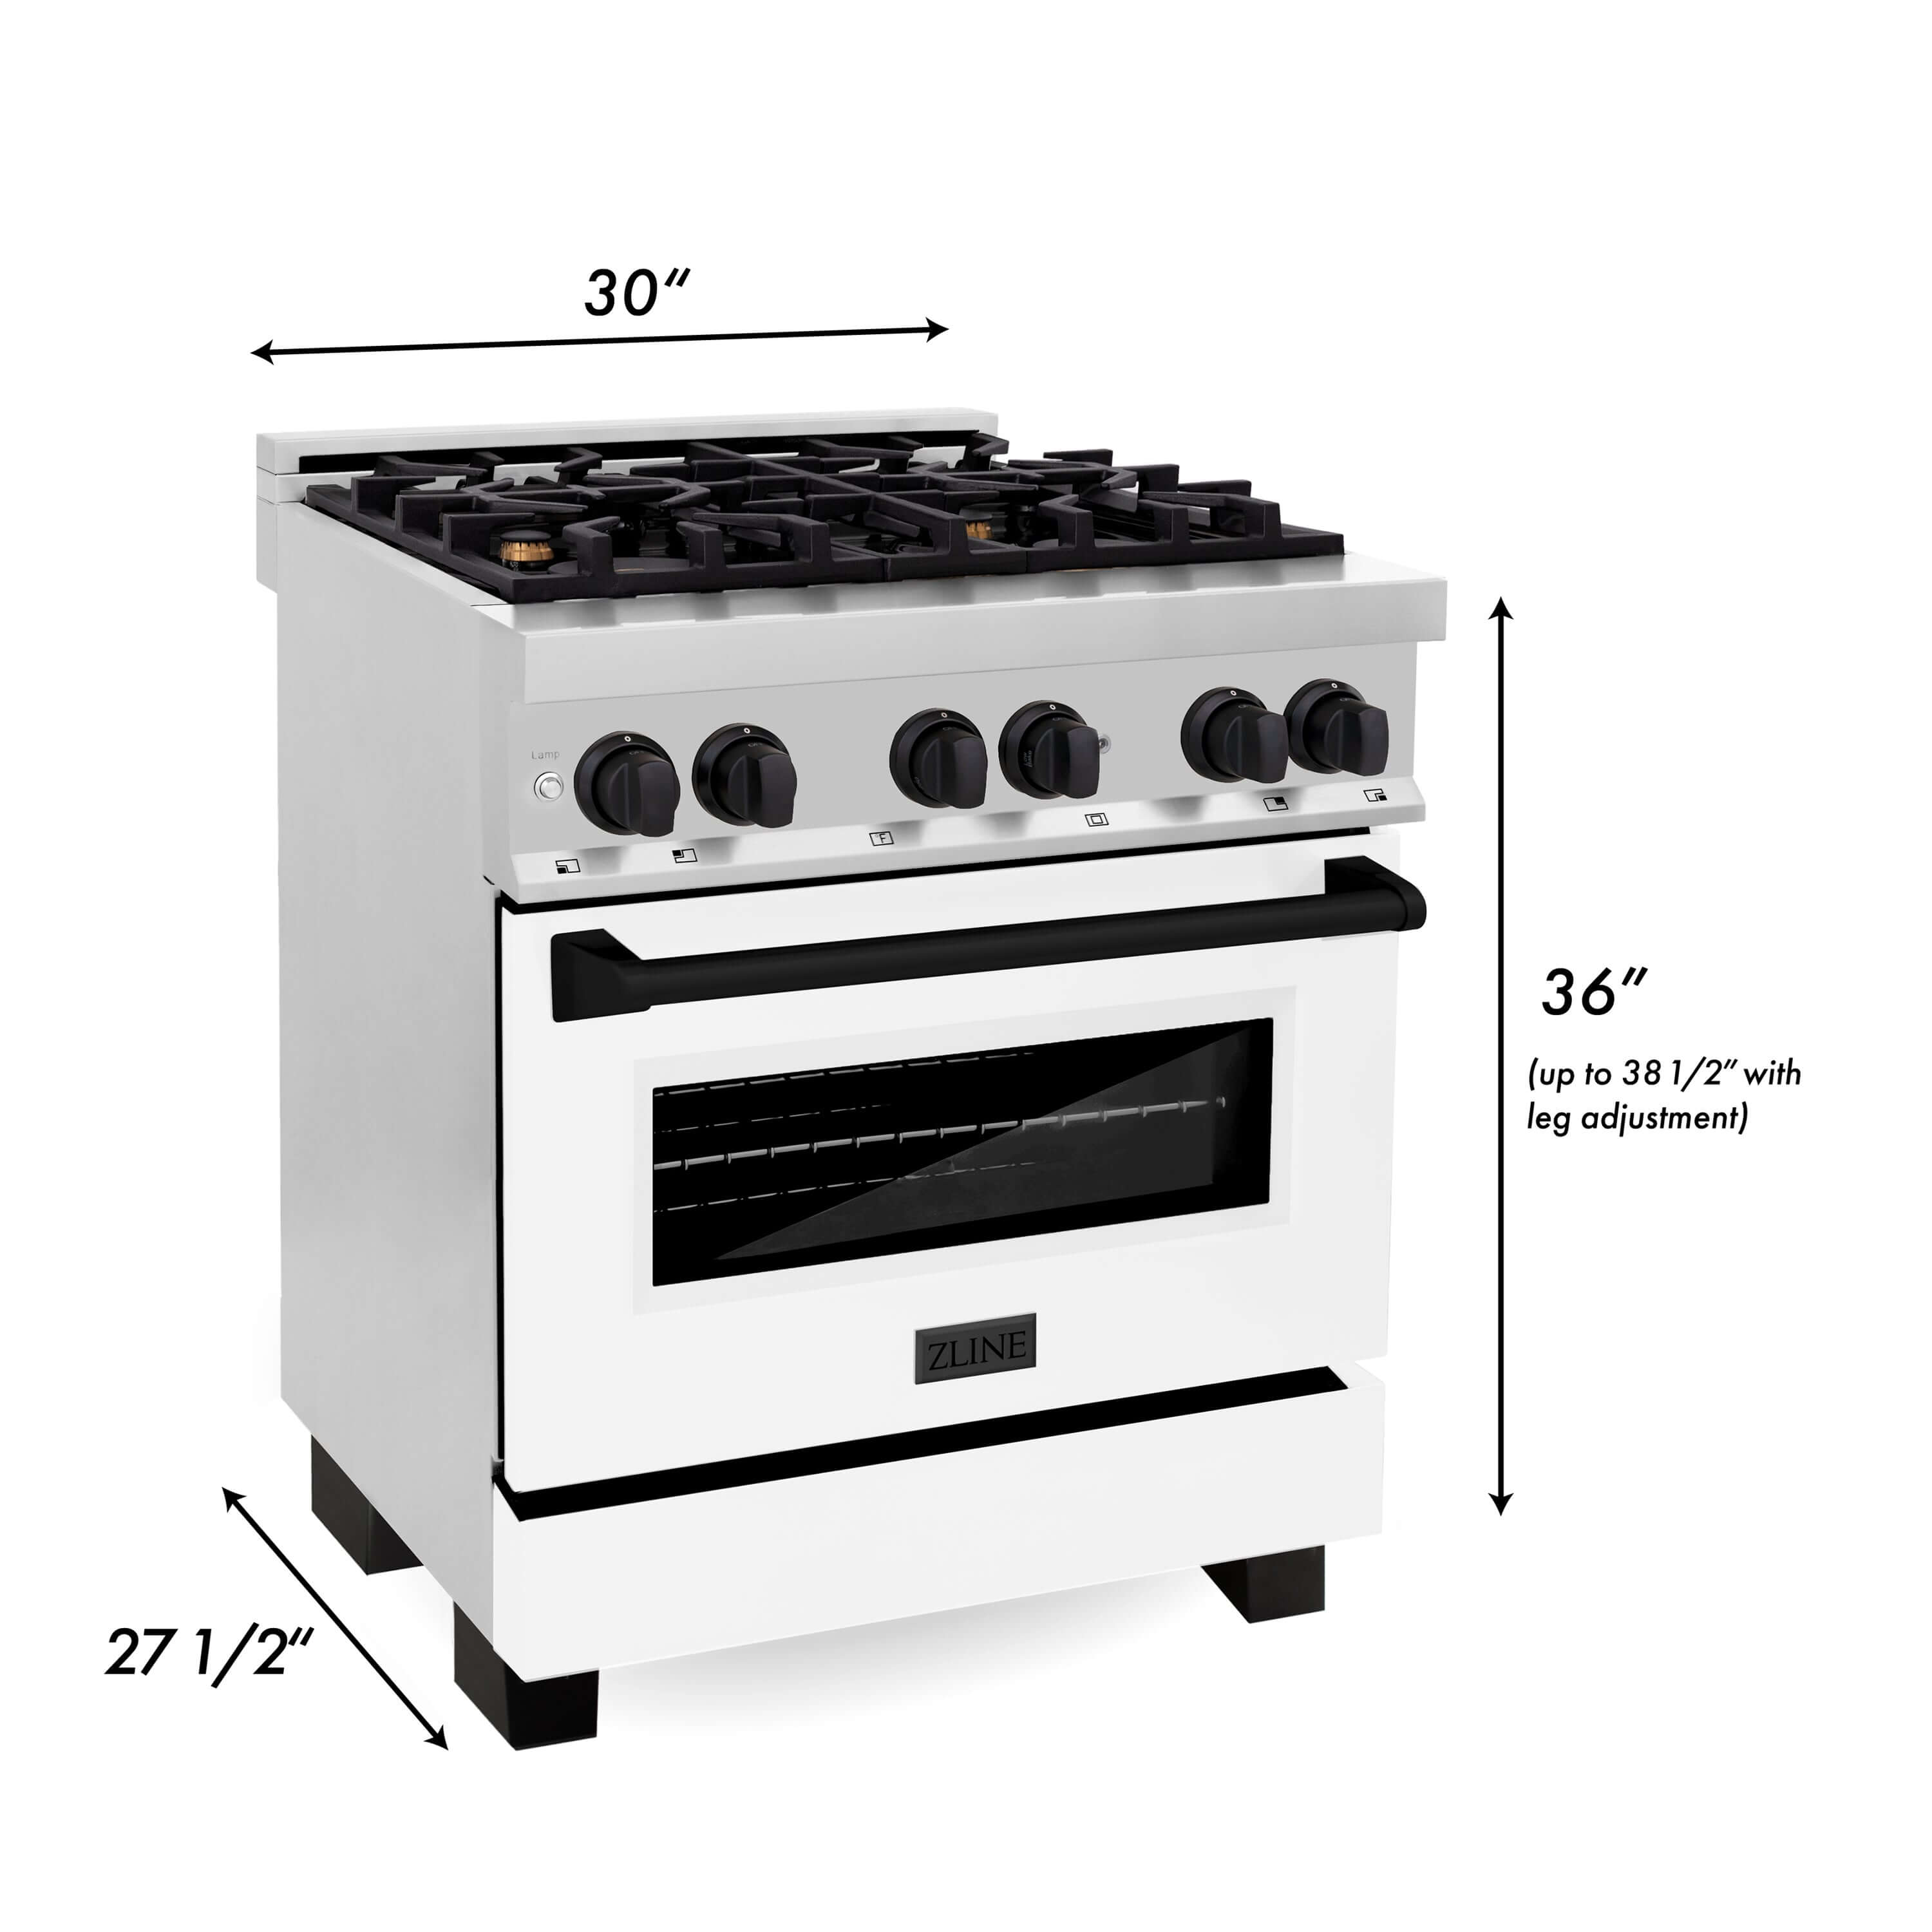 ZLINE Autograph Edition 30 in. Kitchen Package with Stainless Steel Dual Fuel Range with White Matte Door, Range Hood and Dishwasher with Matte Black Accents (3AKP-RAWMRHDWM30-MB) dimensional diagram with measurements.